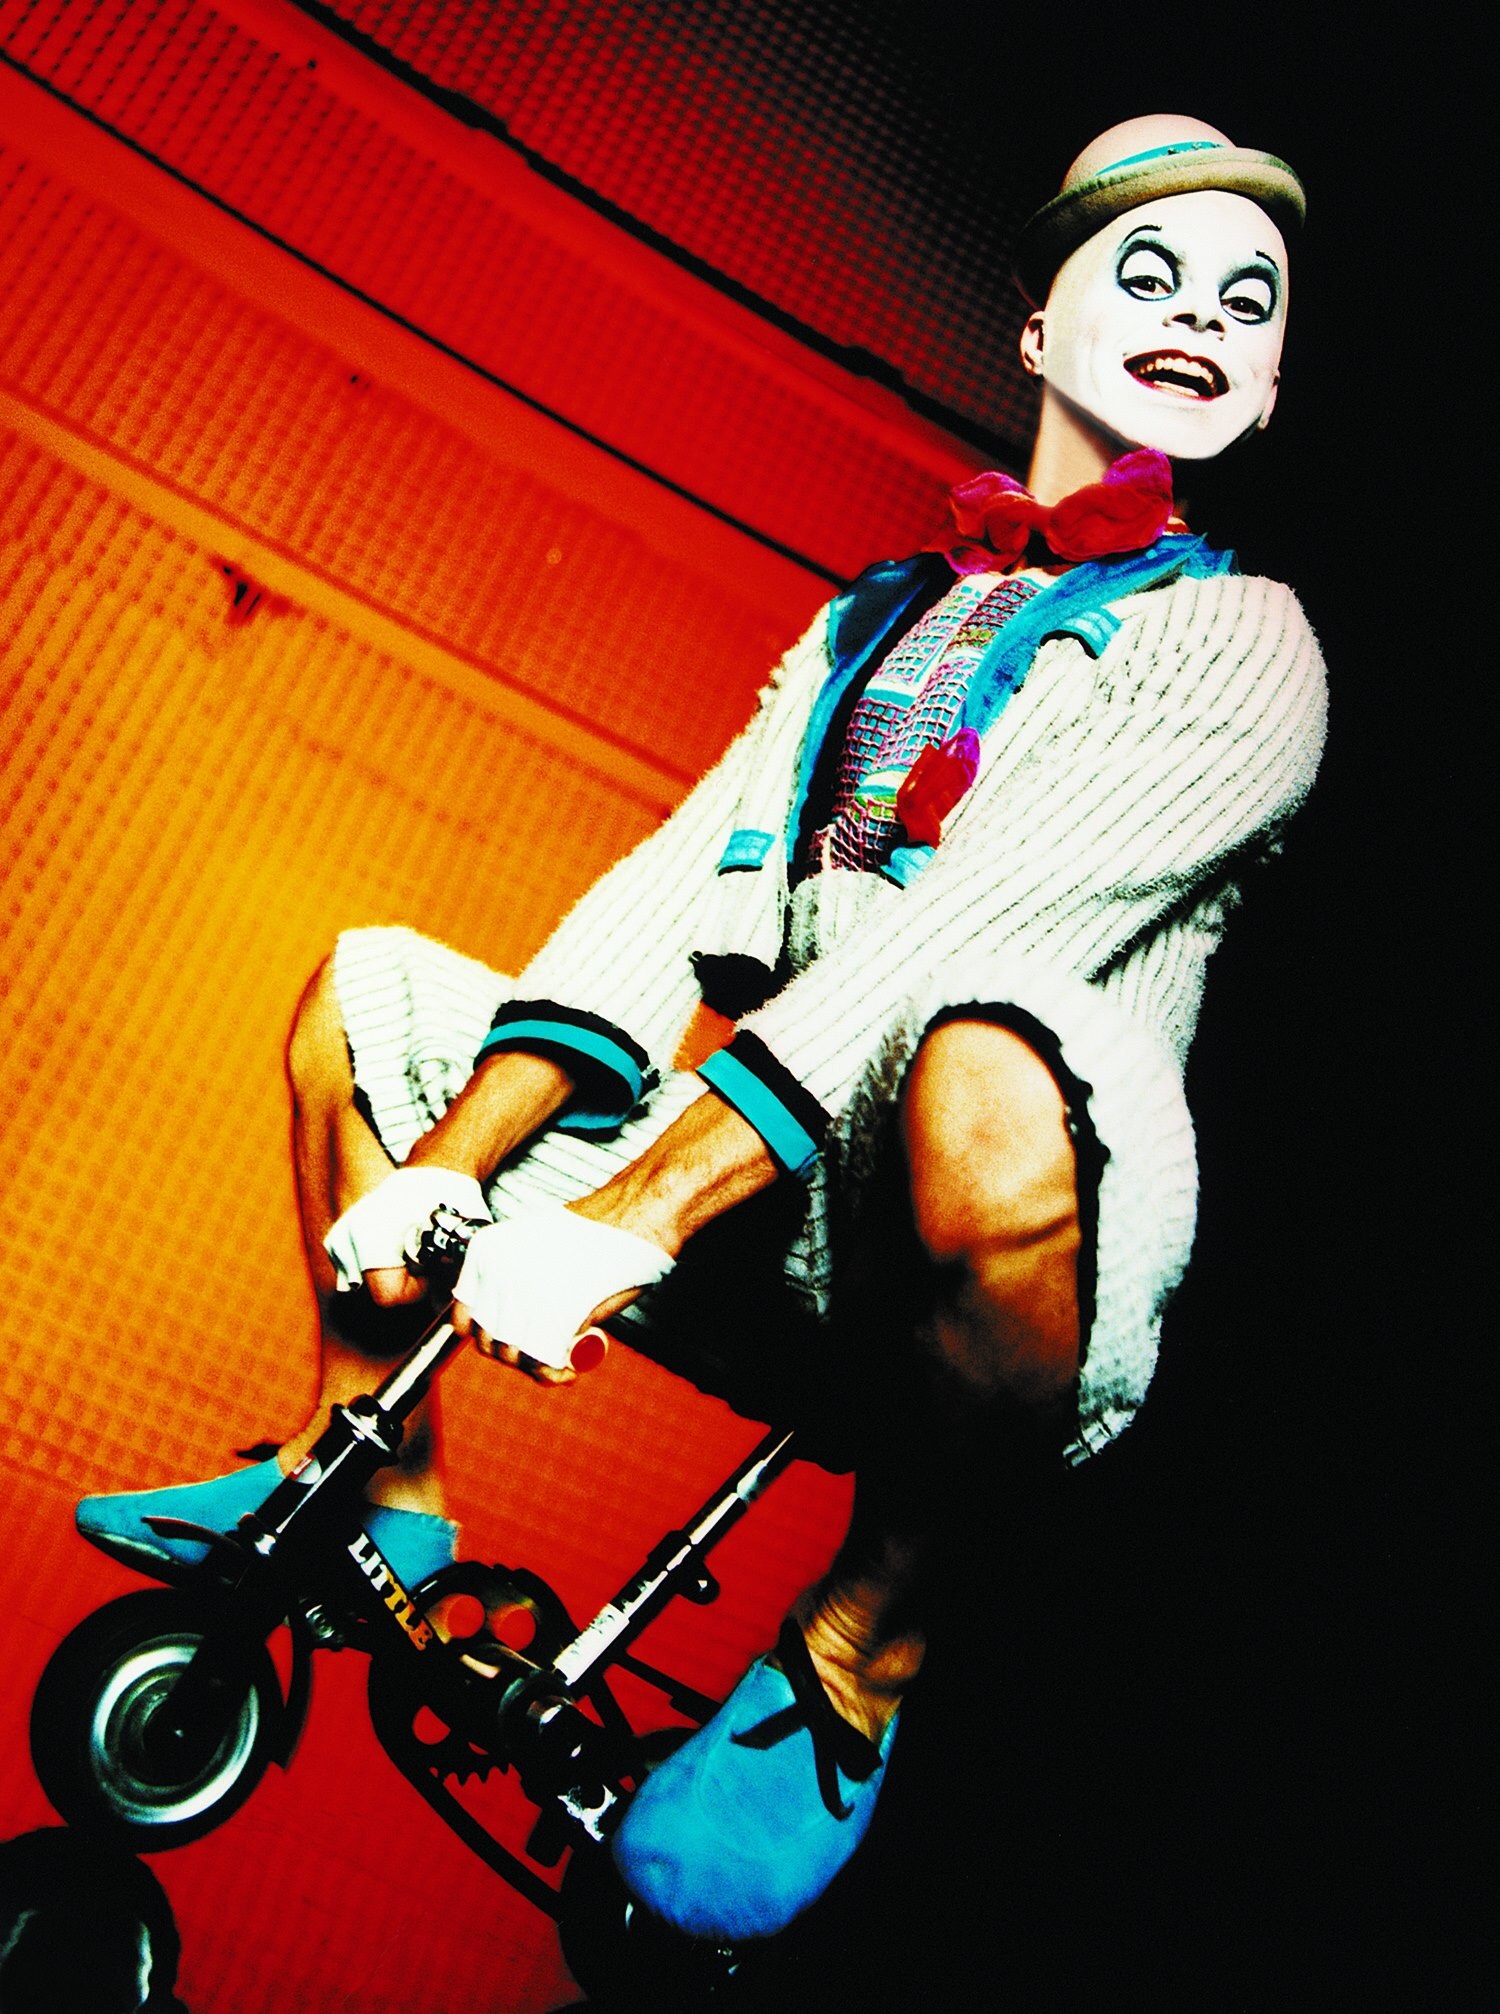 As The Walker, character he created for Cirque du Soleil